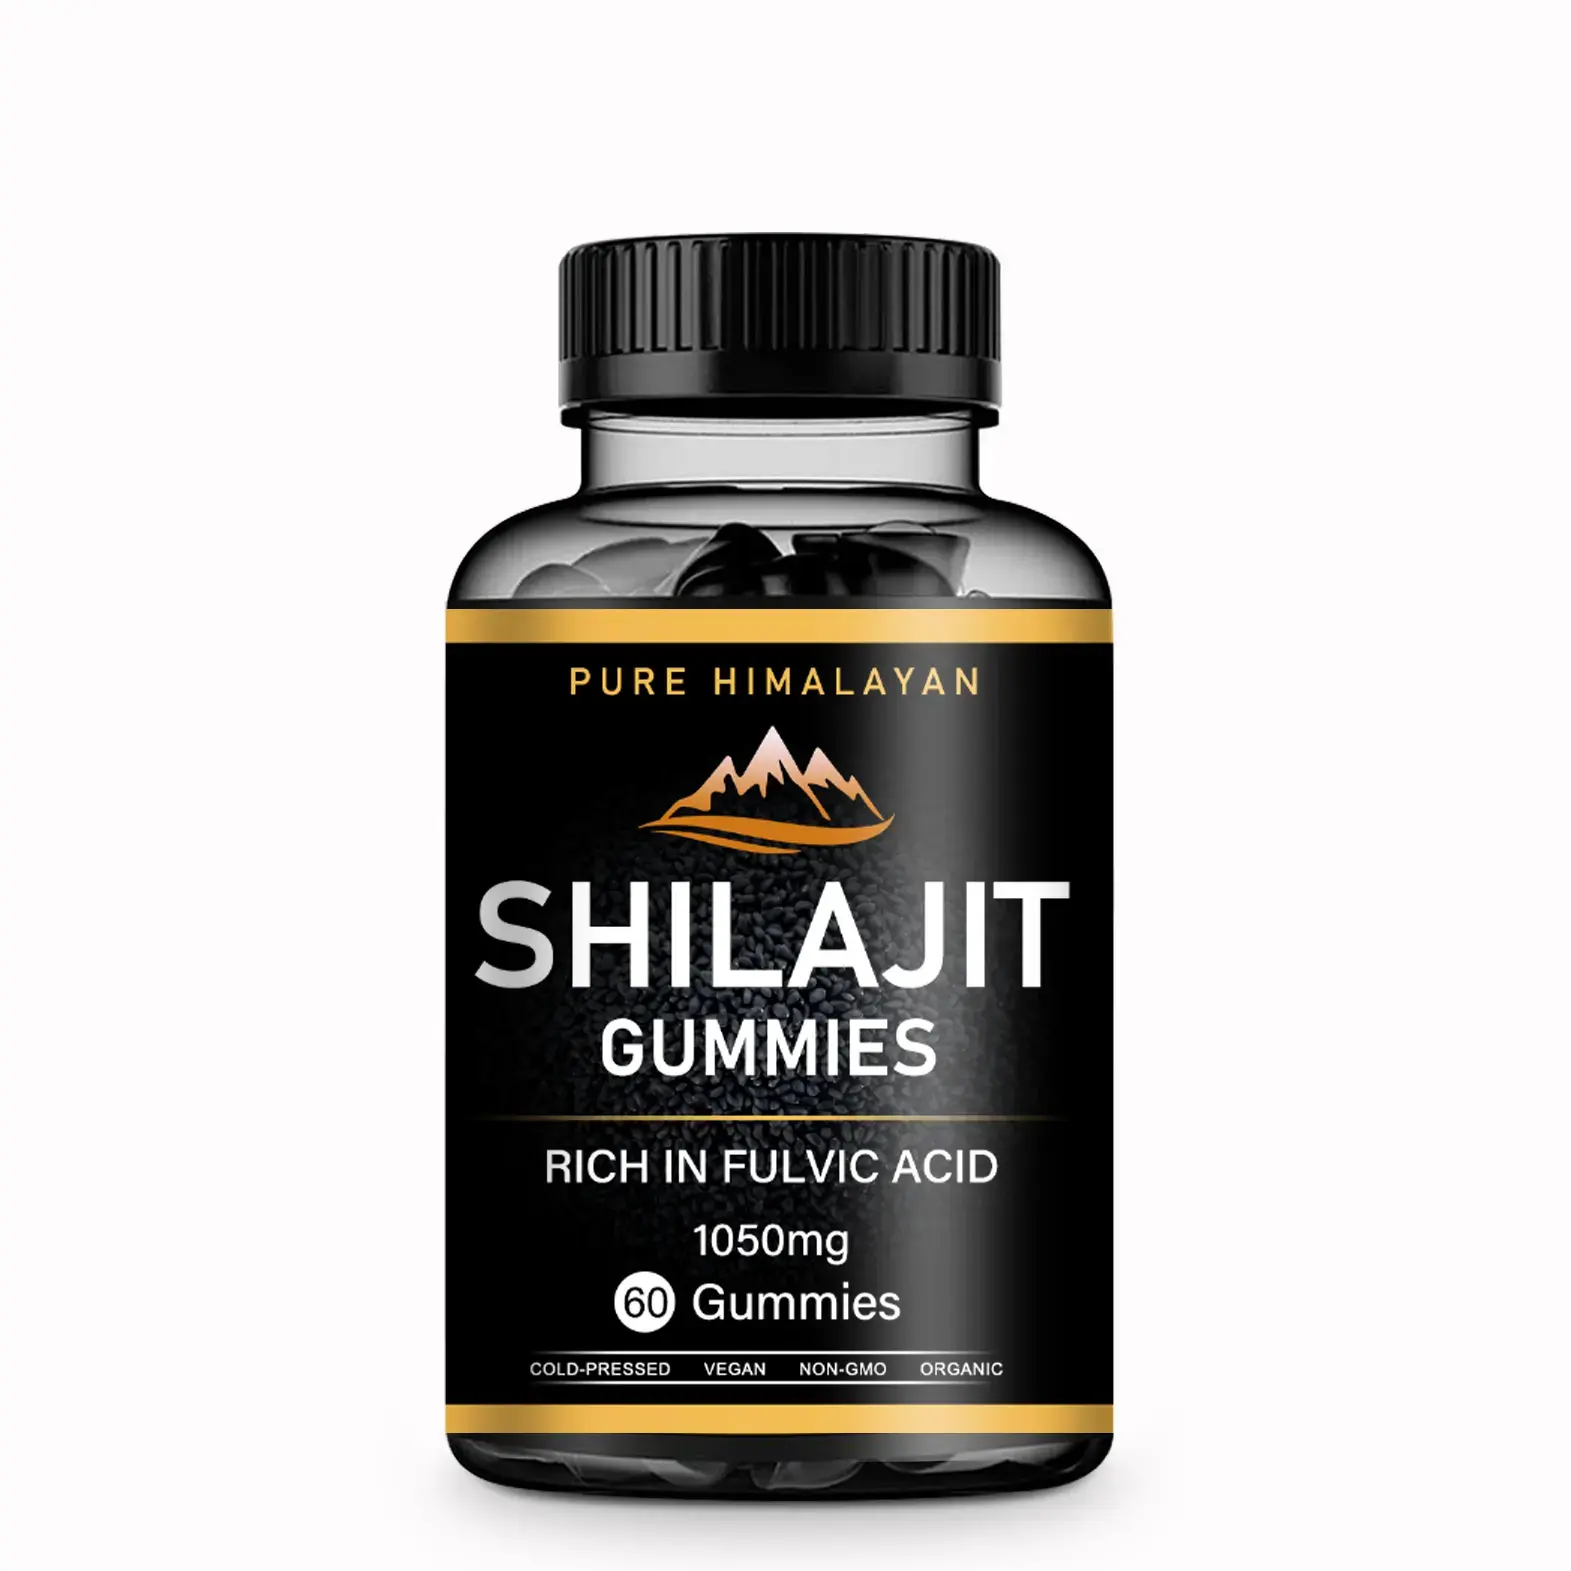 Yatcon OEM Private Label fulvic acid gummy resin pure himalayan shilajit gummies supplement for digestive health